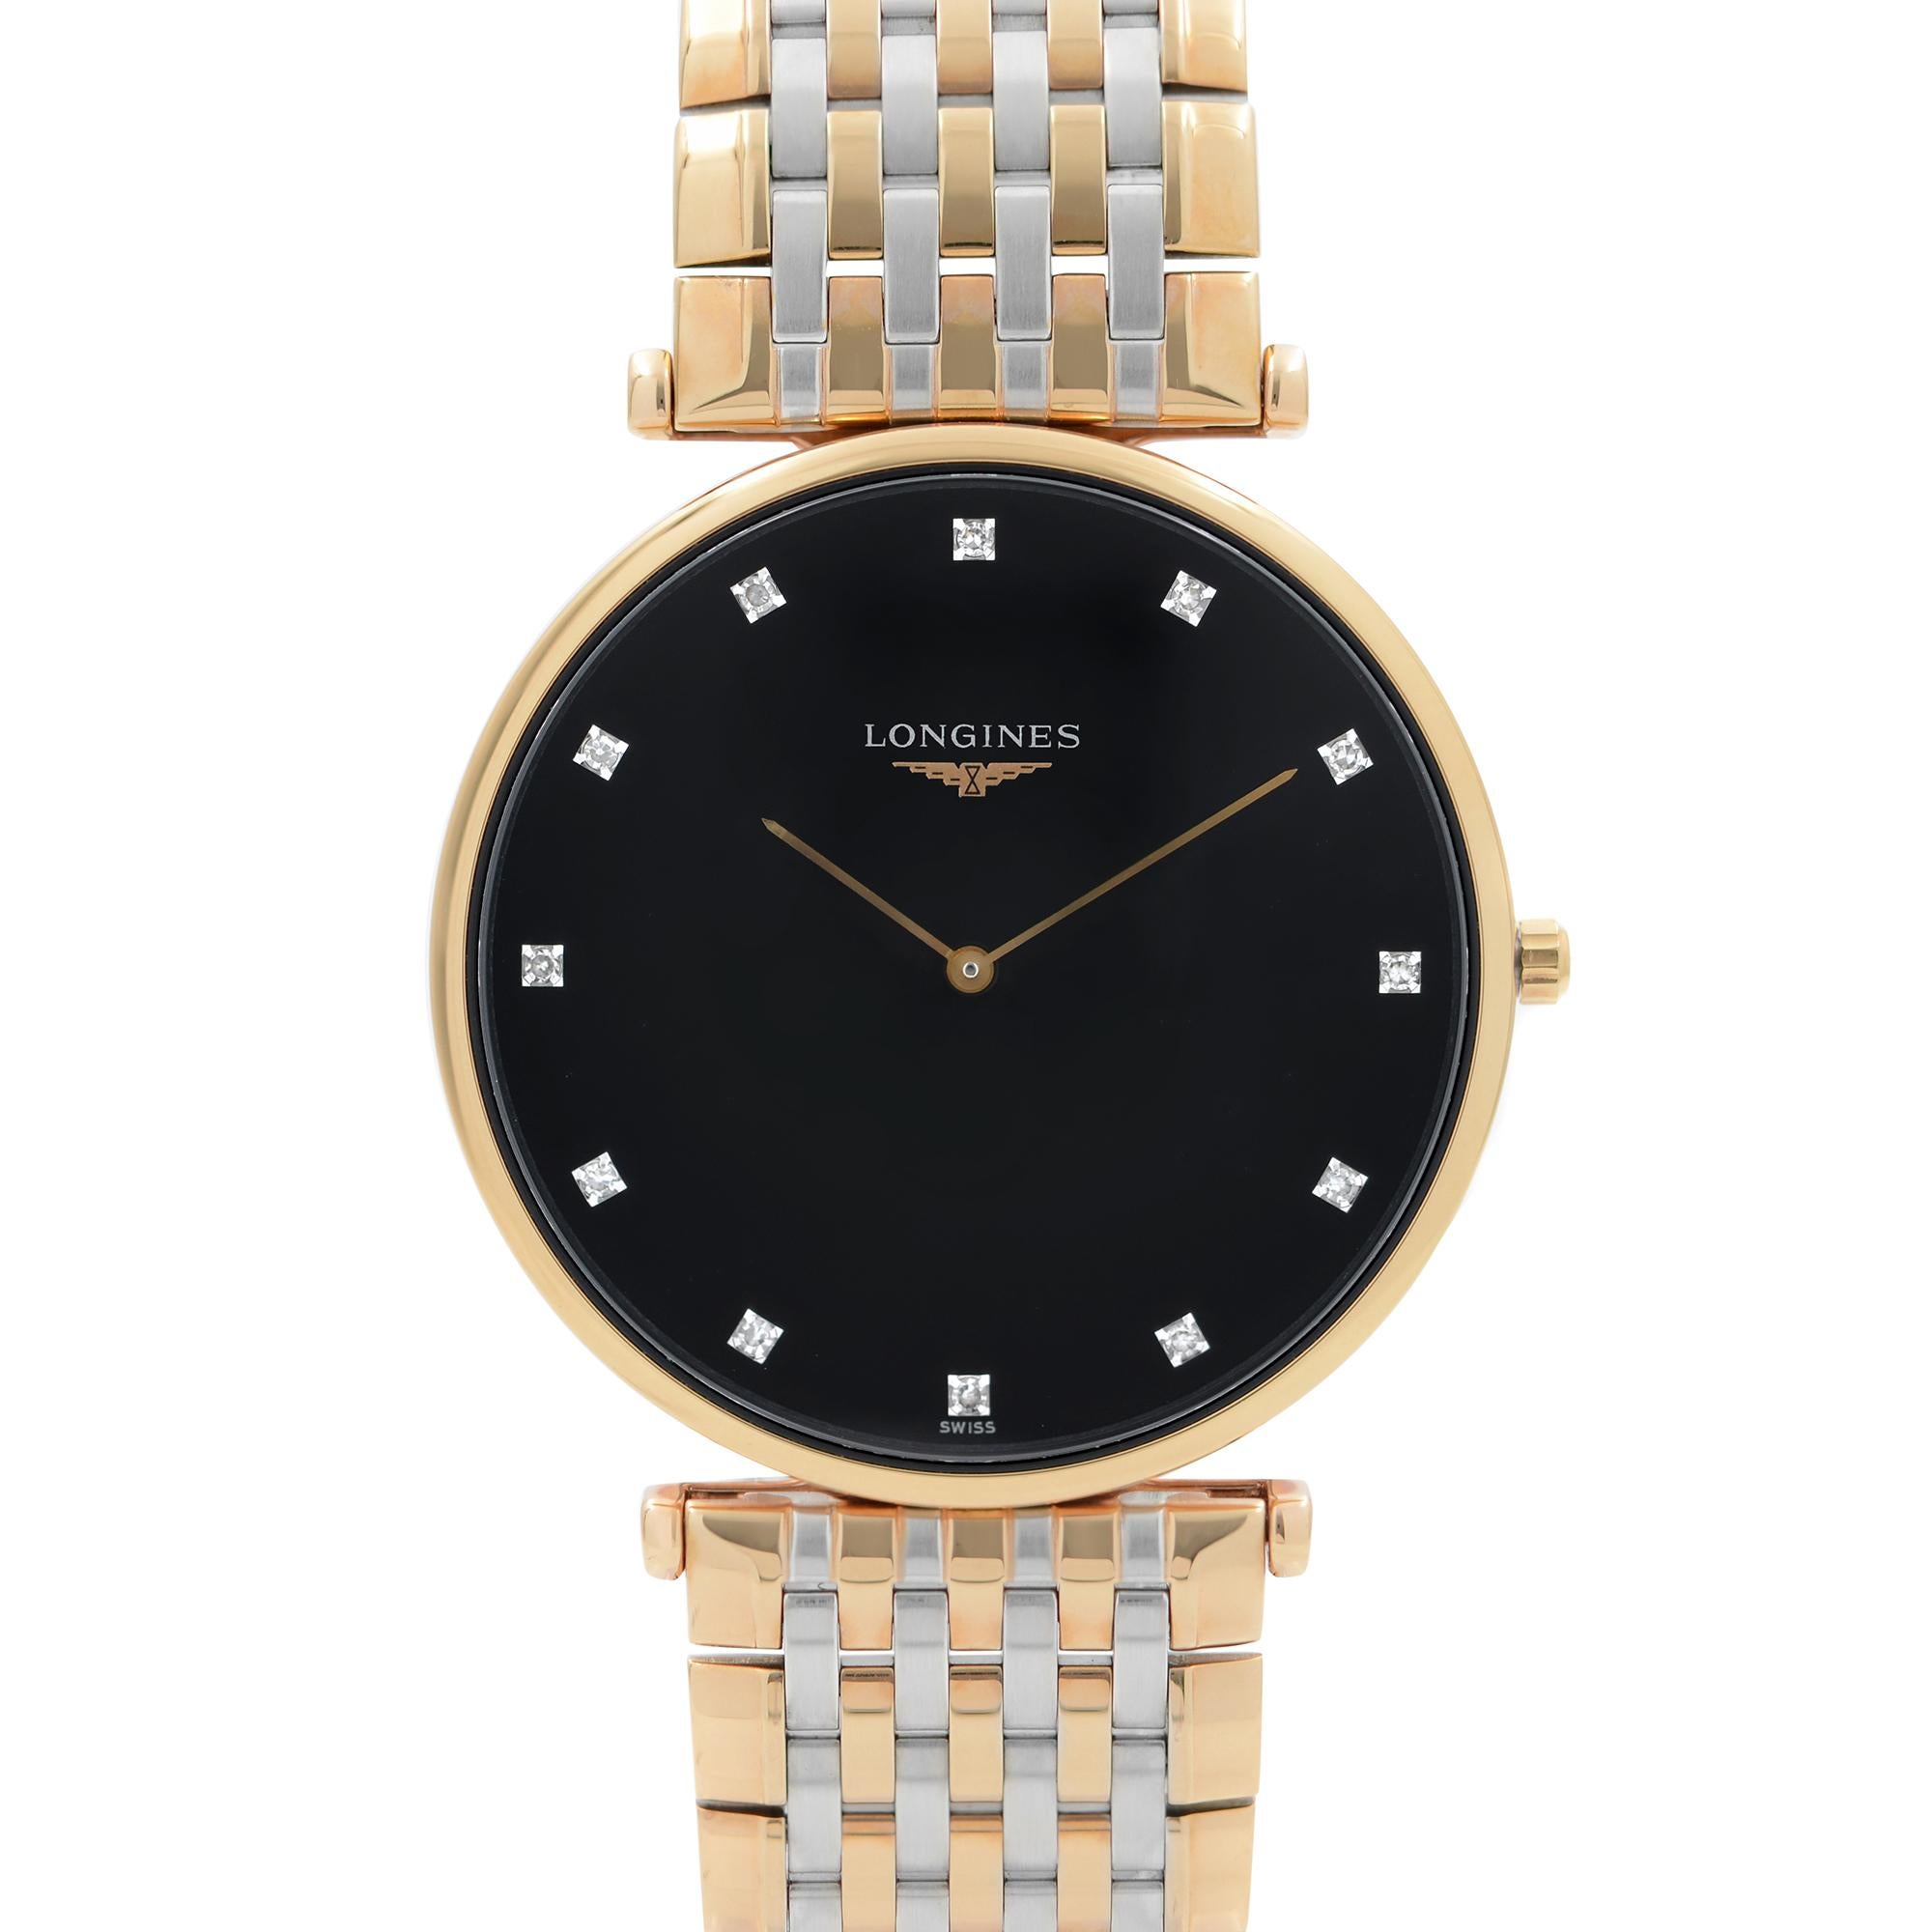 New With Defects Longines La Grande Classique Two-Tone Steel Black Dial Men's Watch L4.766.1.57.7.  The Gold Tone back case has minor scratches.  This Beautiful Timepiece Features: Rose Gold PVD Stainless Steel Case with a Two-Tone Silver-Tone &